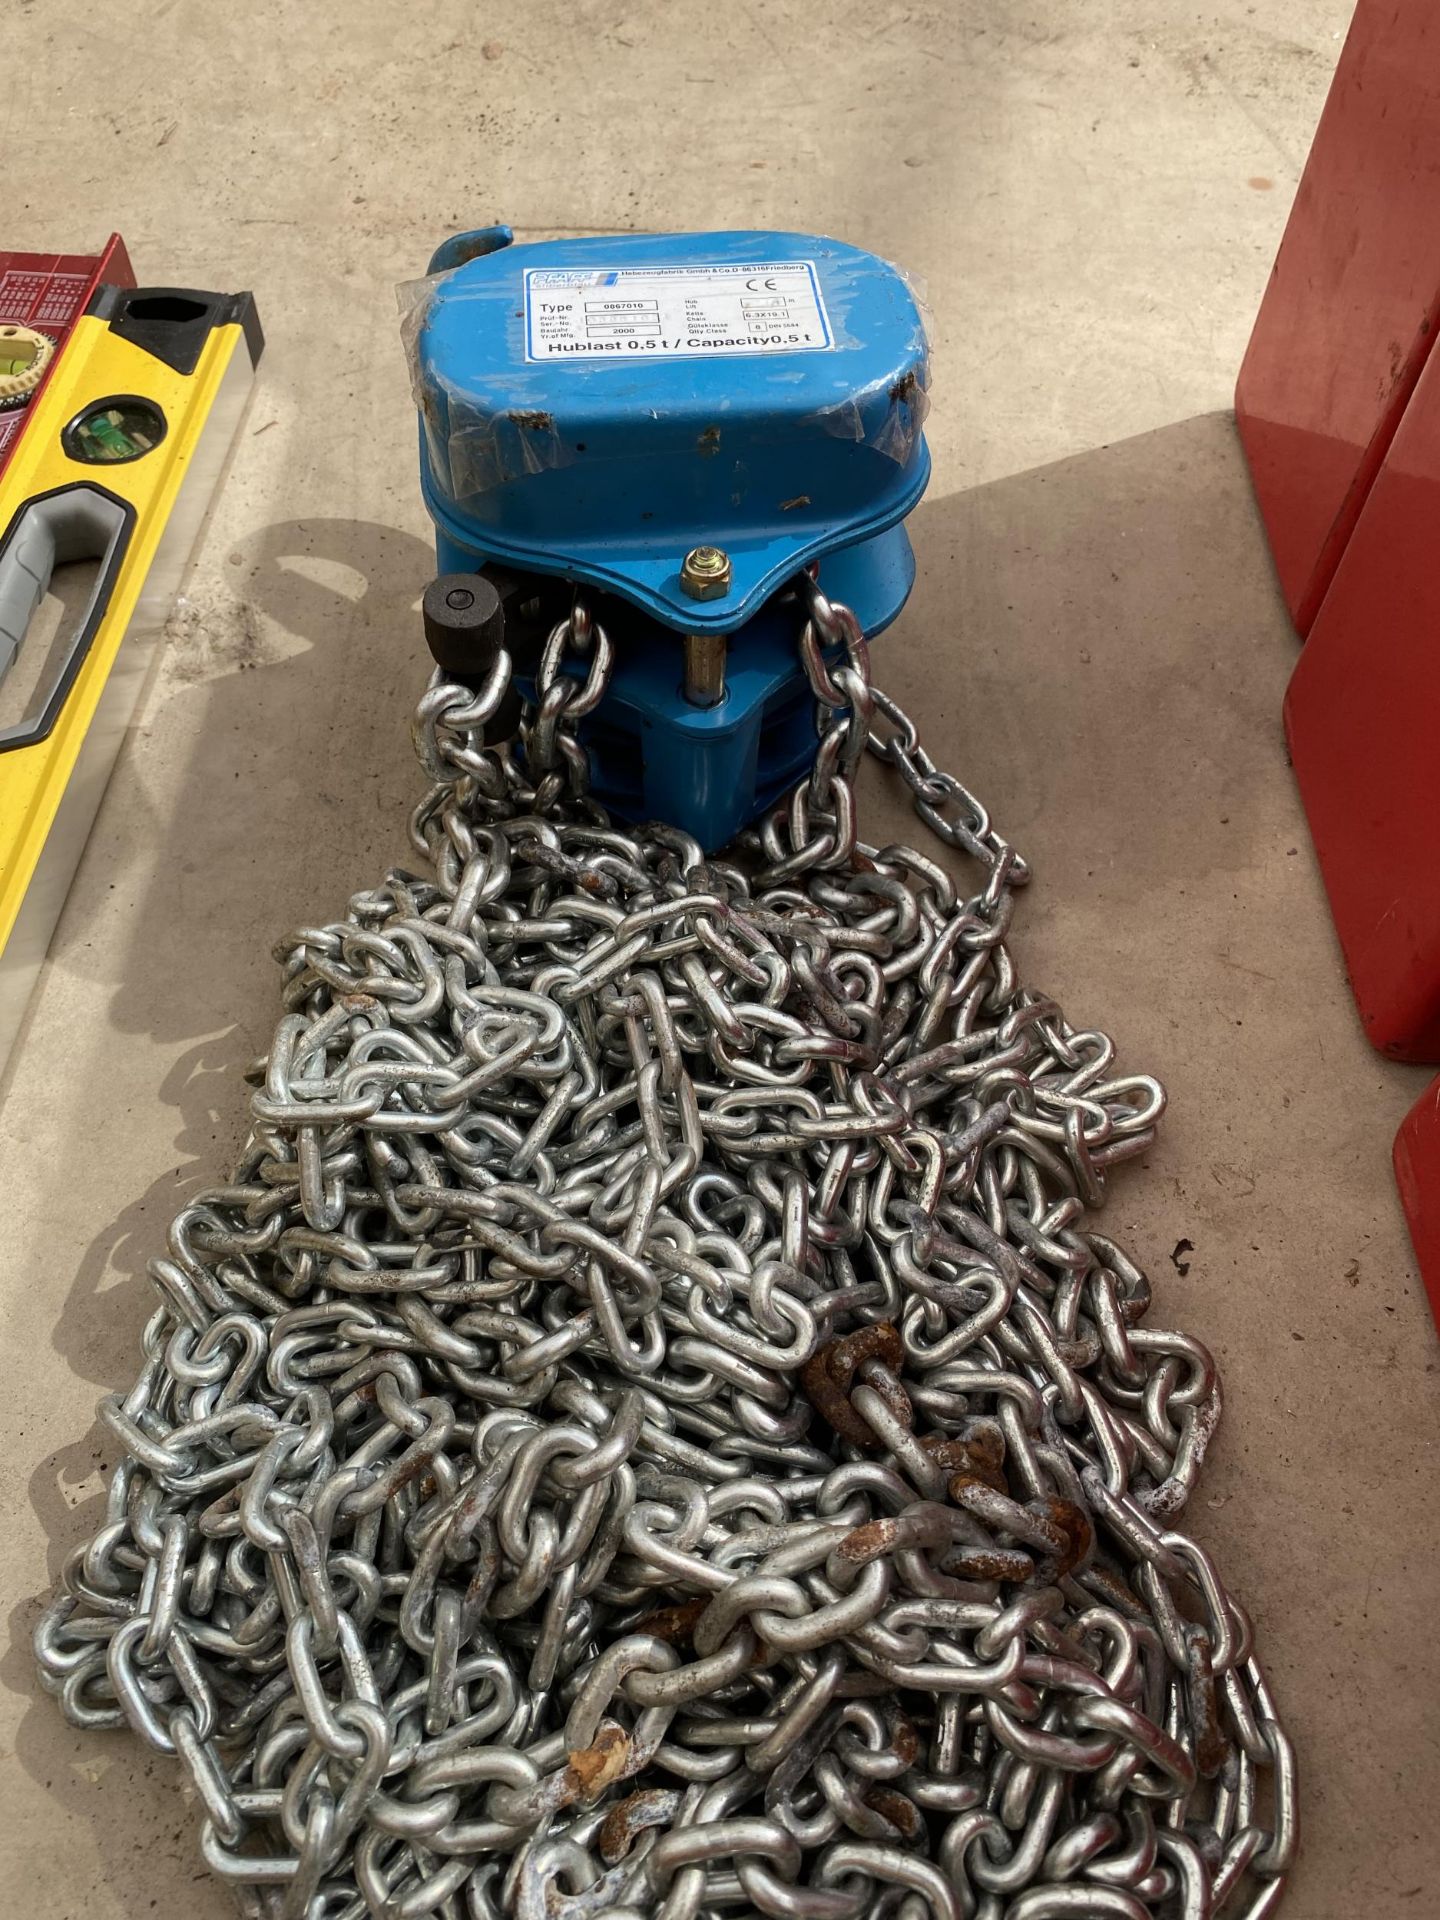 A LARGE PFAFF 0.5T BLOCK & TACKLE CHAIN AND HOOK - Image 2 of 3